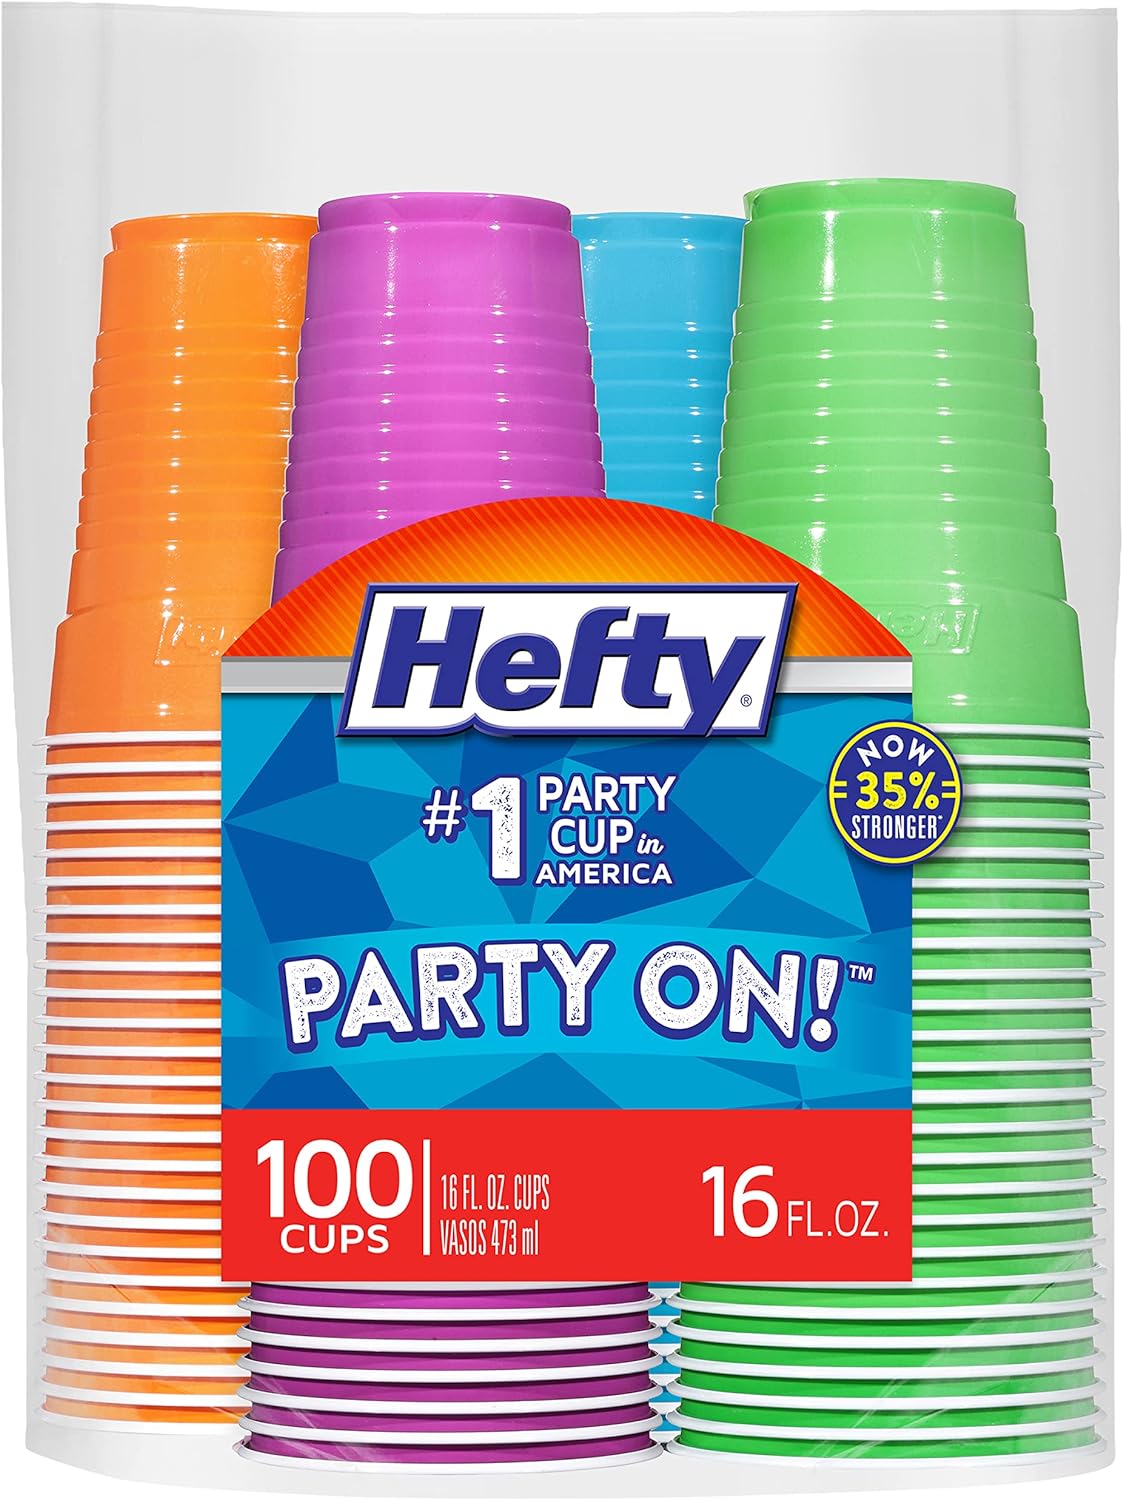 100-Count Hefty Party On Disposable Plastic Cups (Assorted Colors) $7.01 w/ S&S + Free Shipping w/ Prime or on $35+